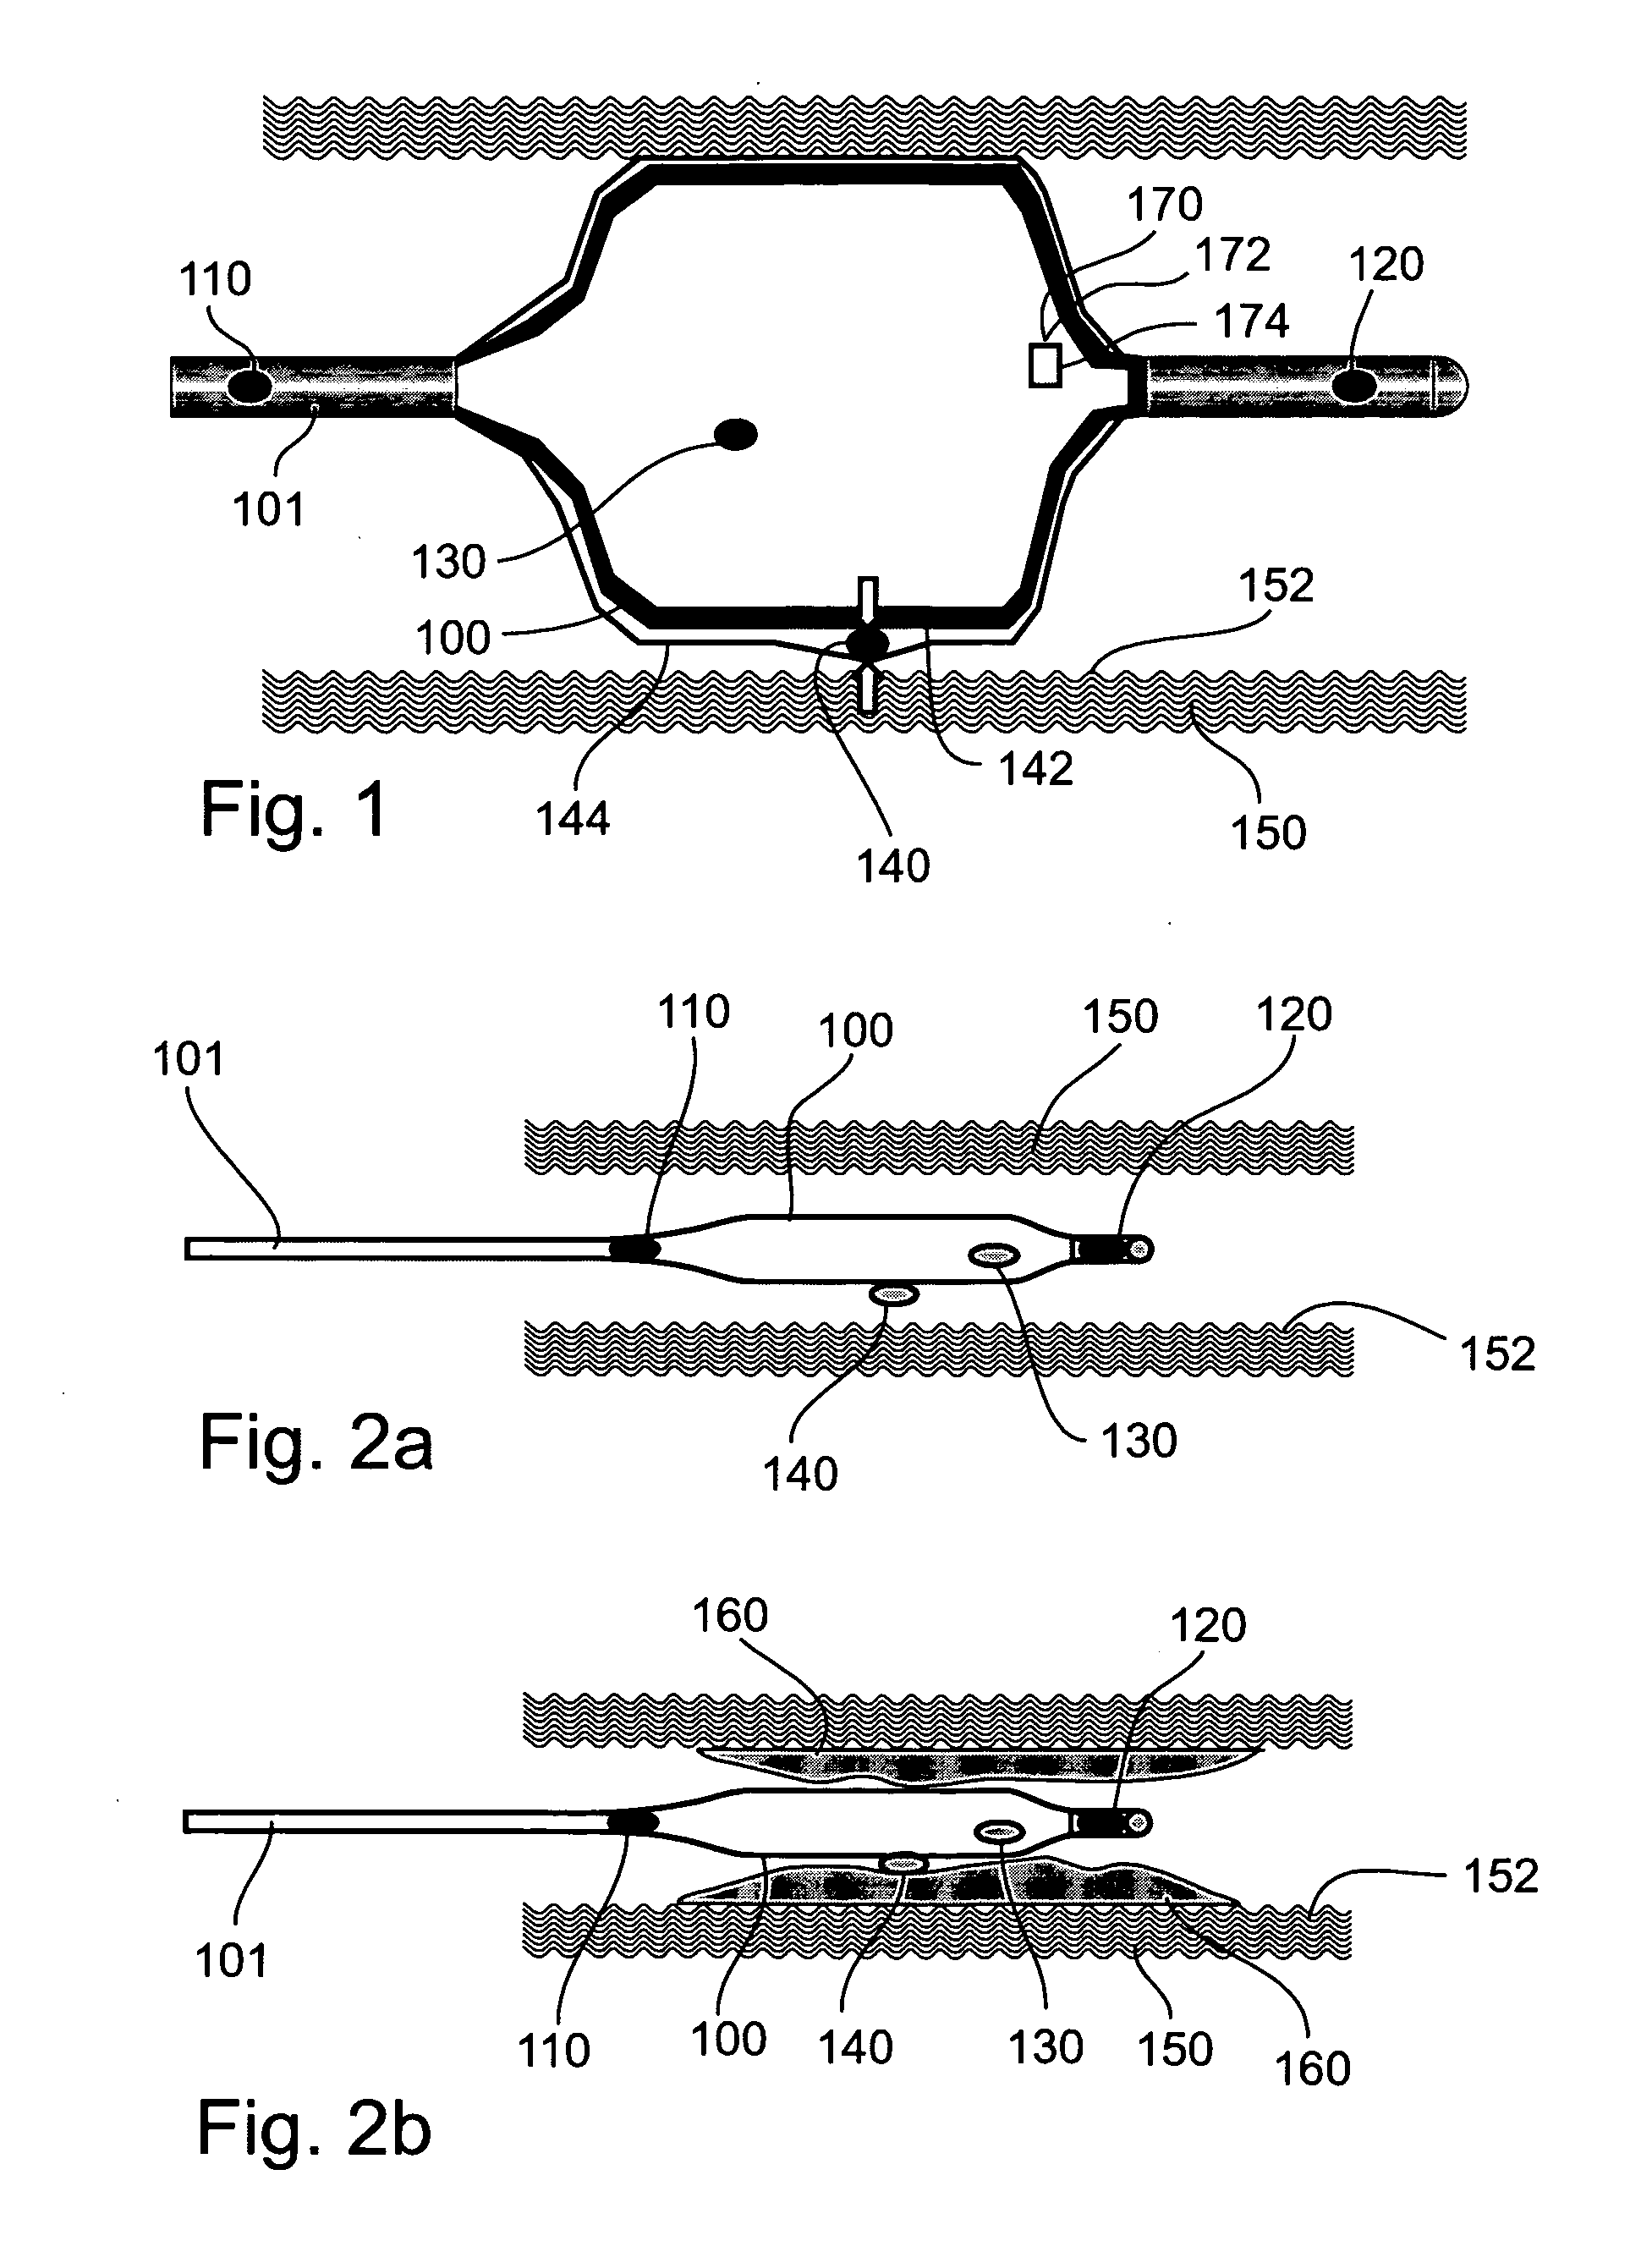 Device, system, and method for detecting, localizing, and characterizing plaque-induced stenosis of a blood vessel